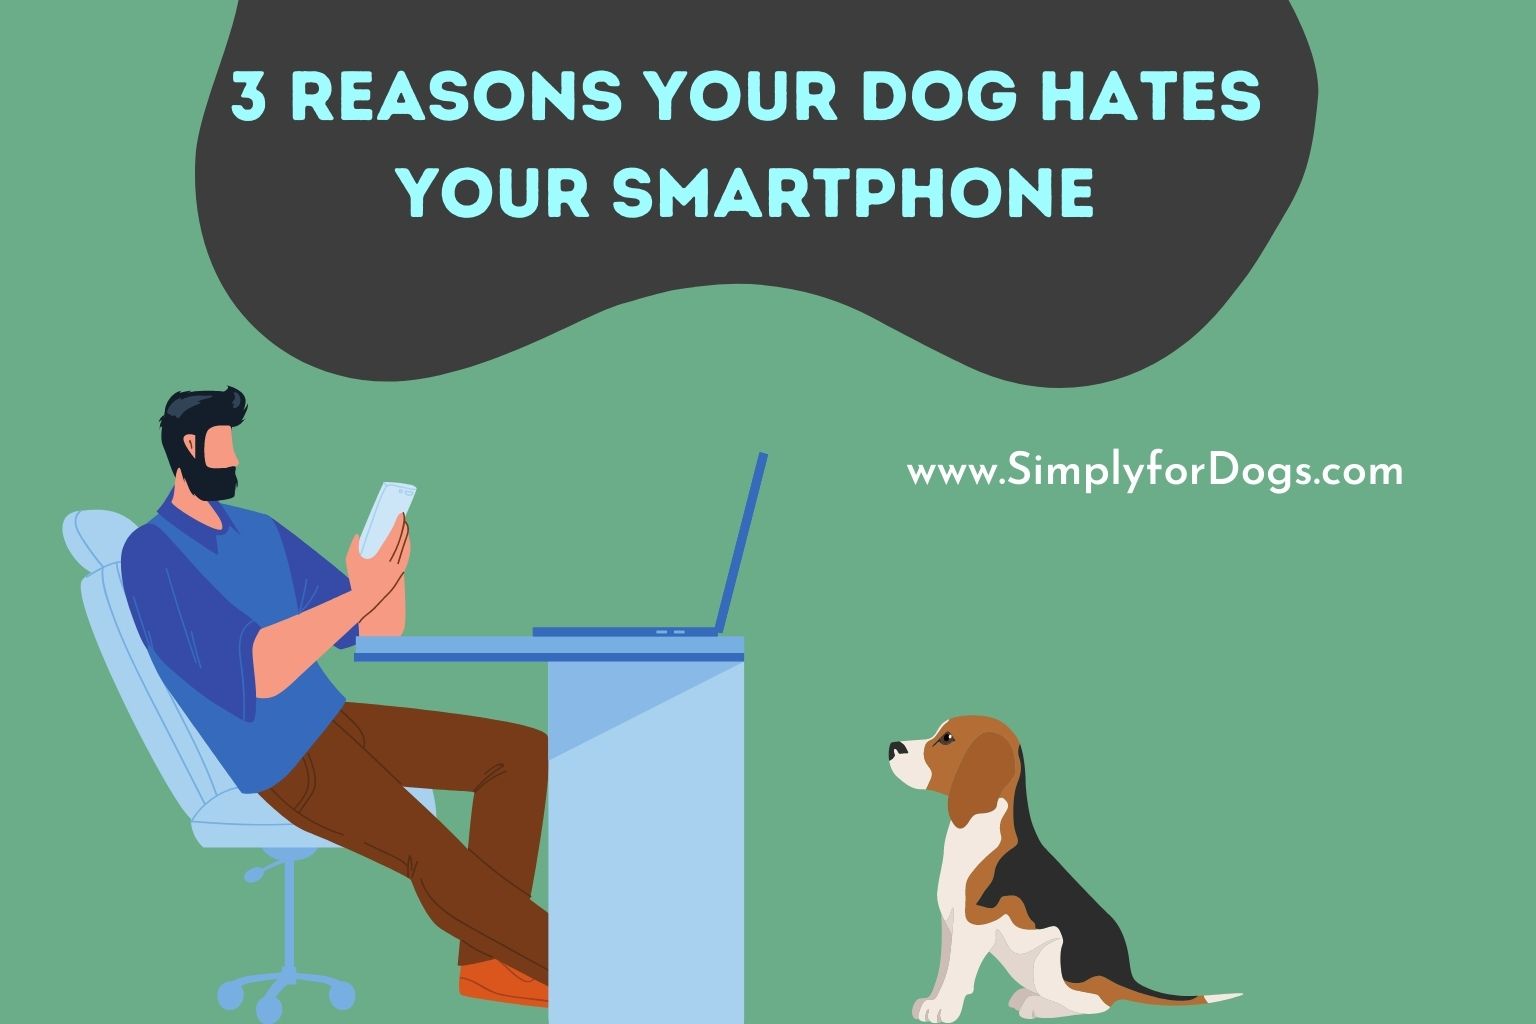 3 Reasons Your Dog Hates Your Smartphone